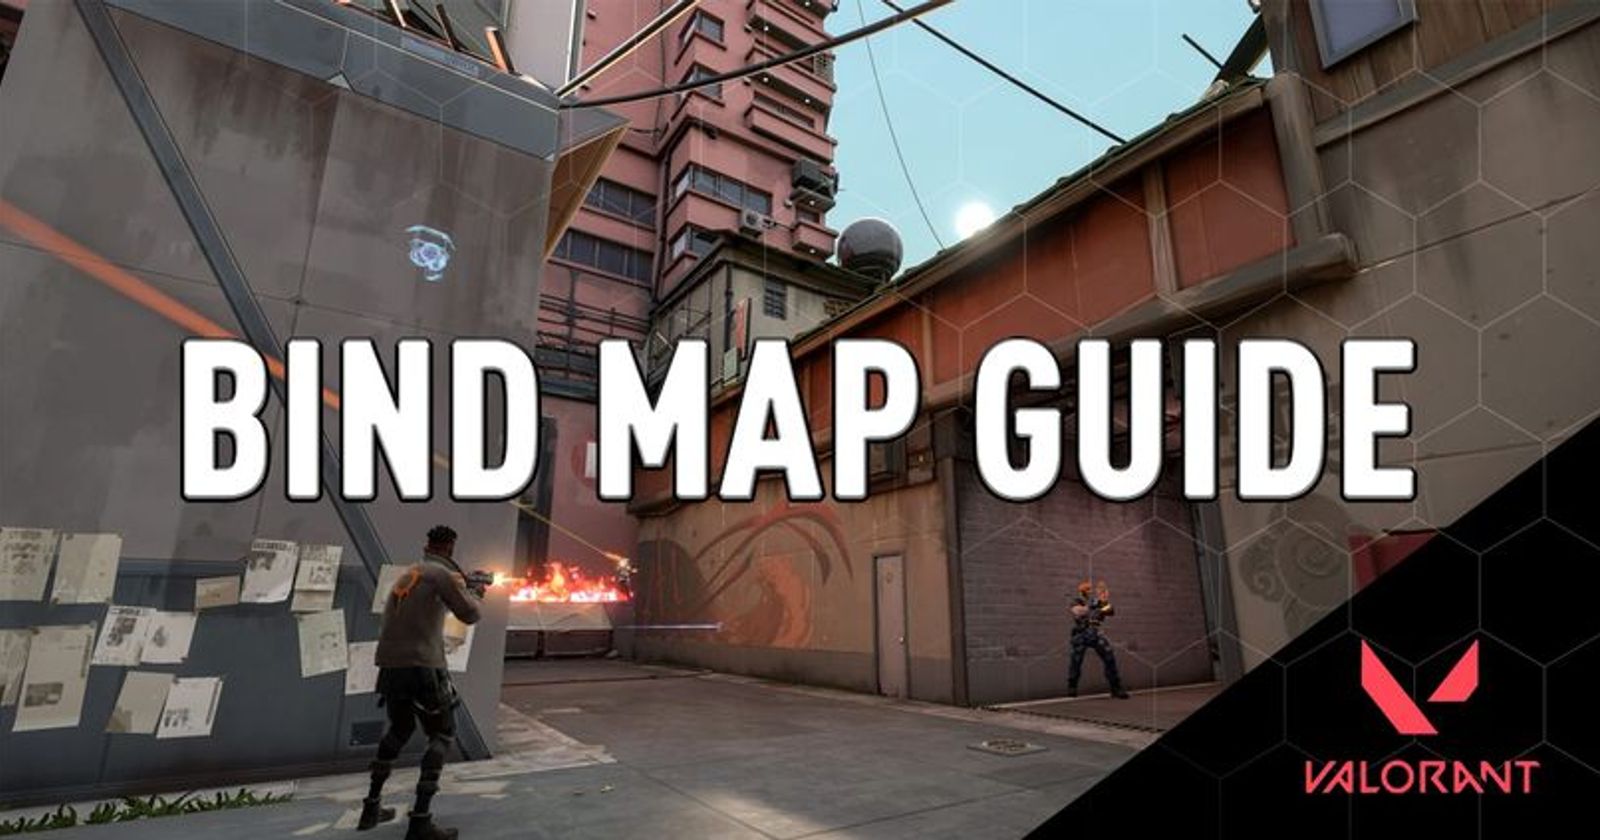 Valorant: Split Map Guide - Spawns, Bombsites, Callouts, and Best